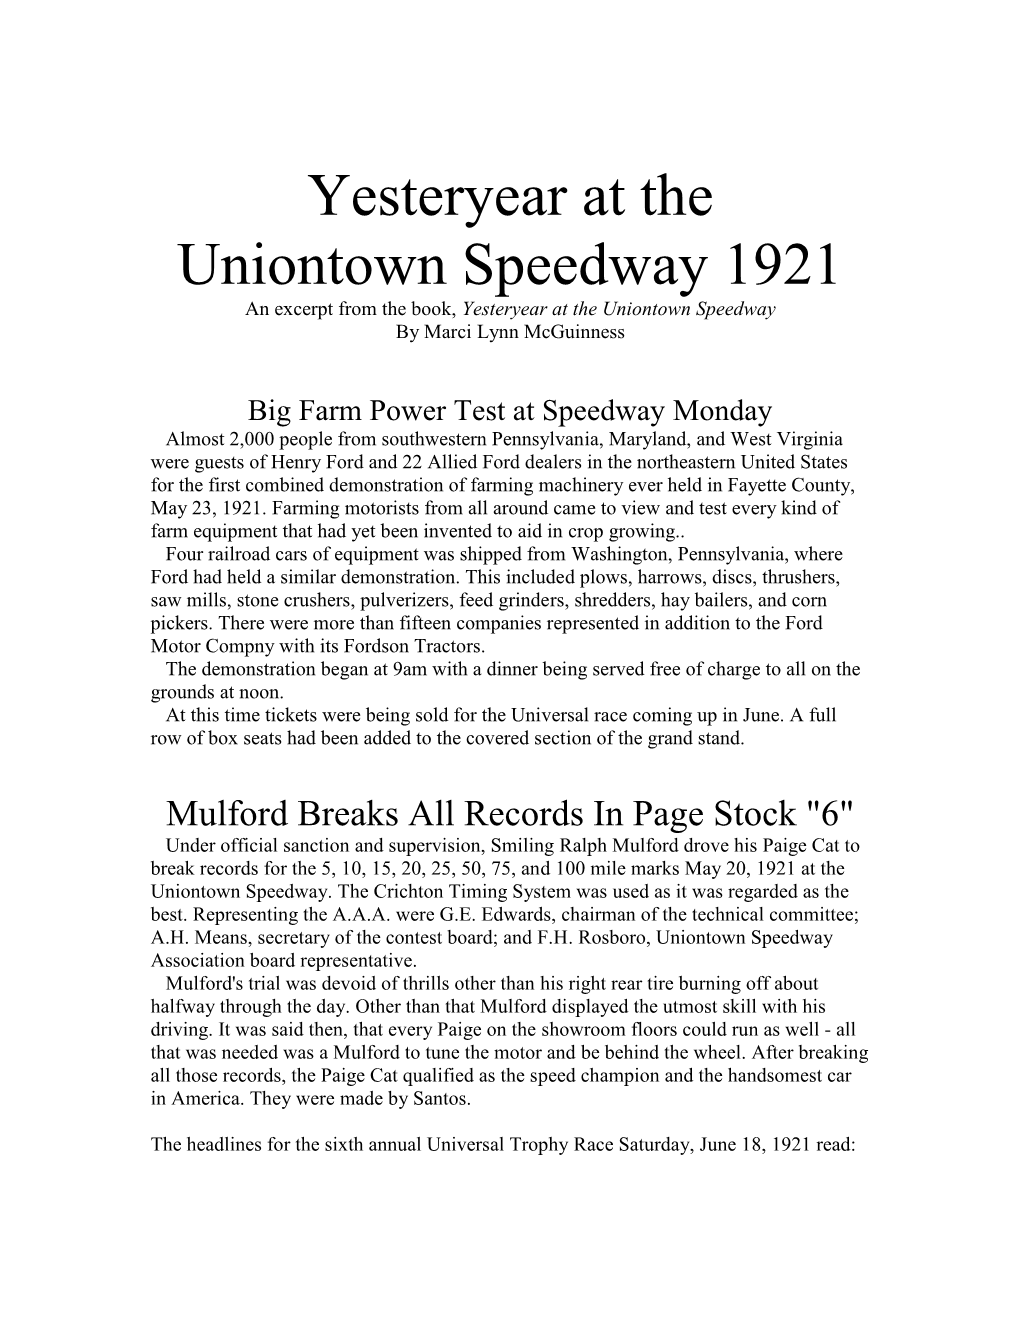 Uniontown Speedway Book Chapters 1921-1922.Pdf